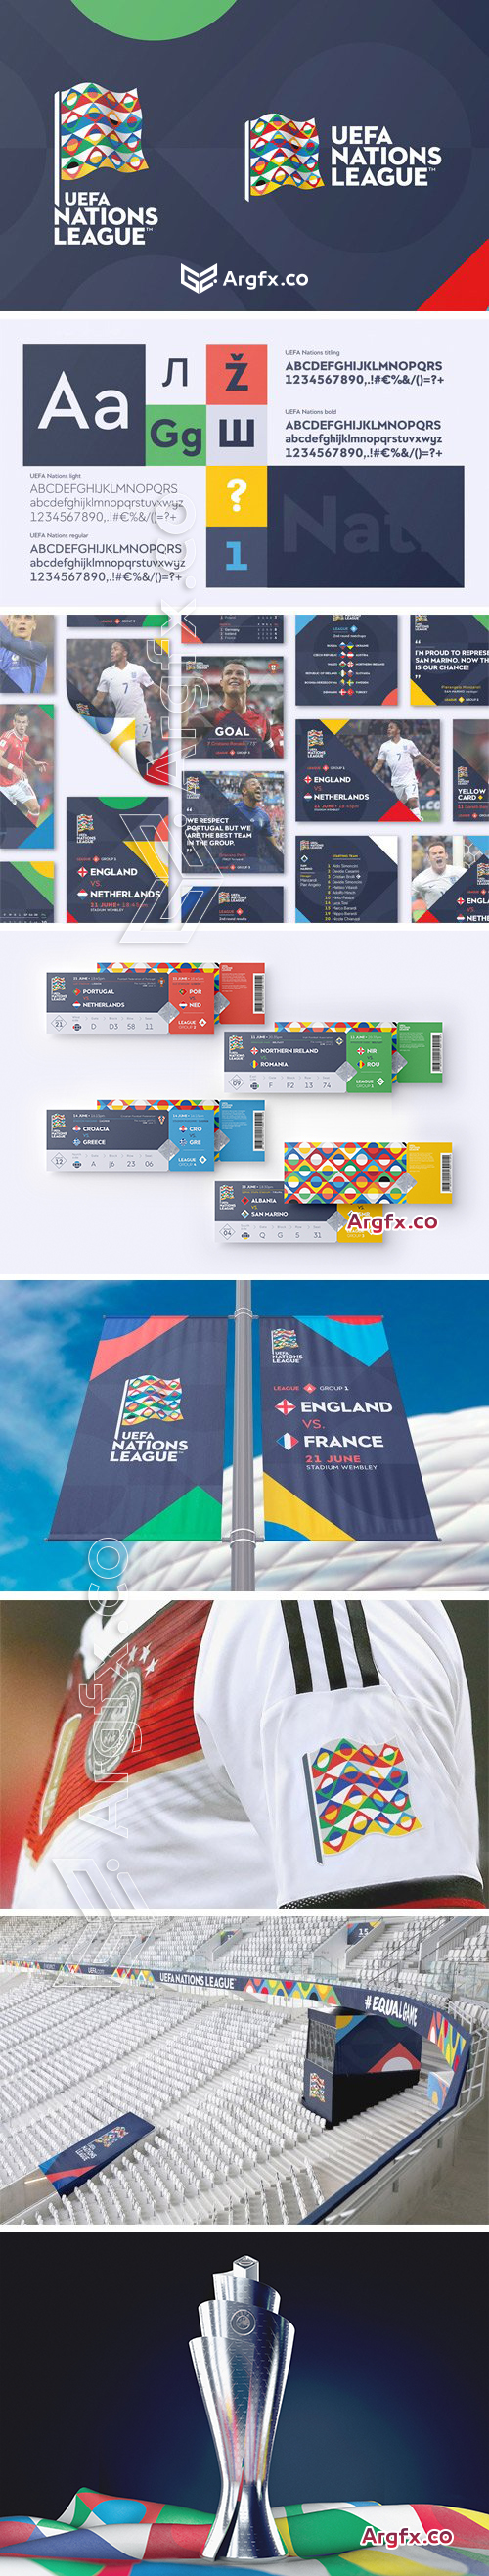 UEFA Nations - Official UEFA Nations League Typeface